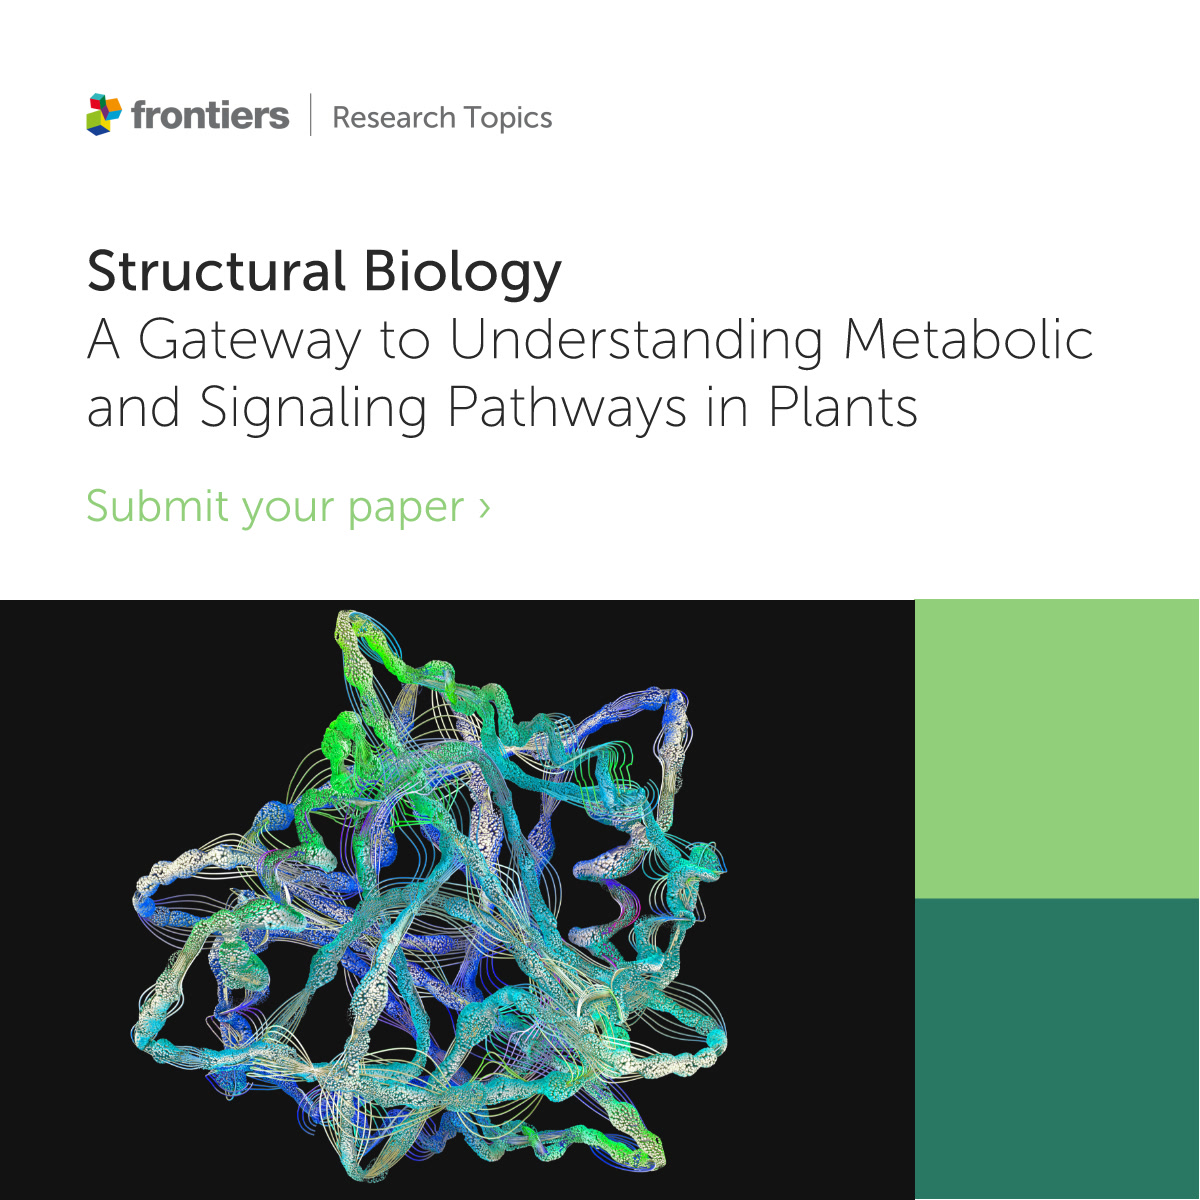 🌱📣We're very pleased to host this exciting collection on Structural Biology, edited by Milosz Ruszkowski, Isabel Nogues & Bartosz Sekula! Please register your interest in contributing a paper today at fro.ntiers.in/cBTH #plantscience